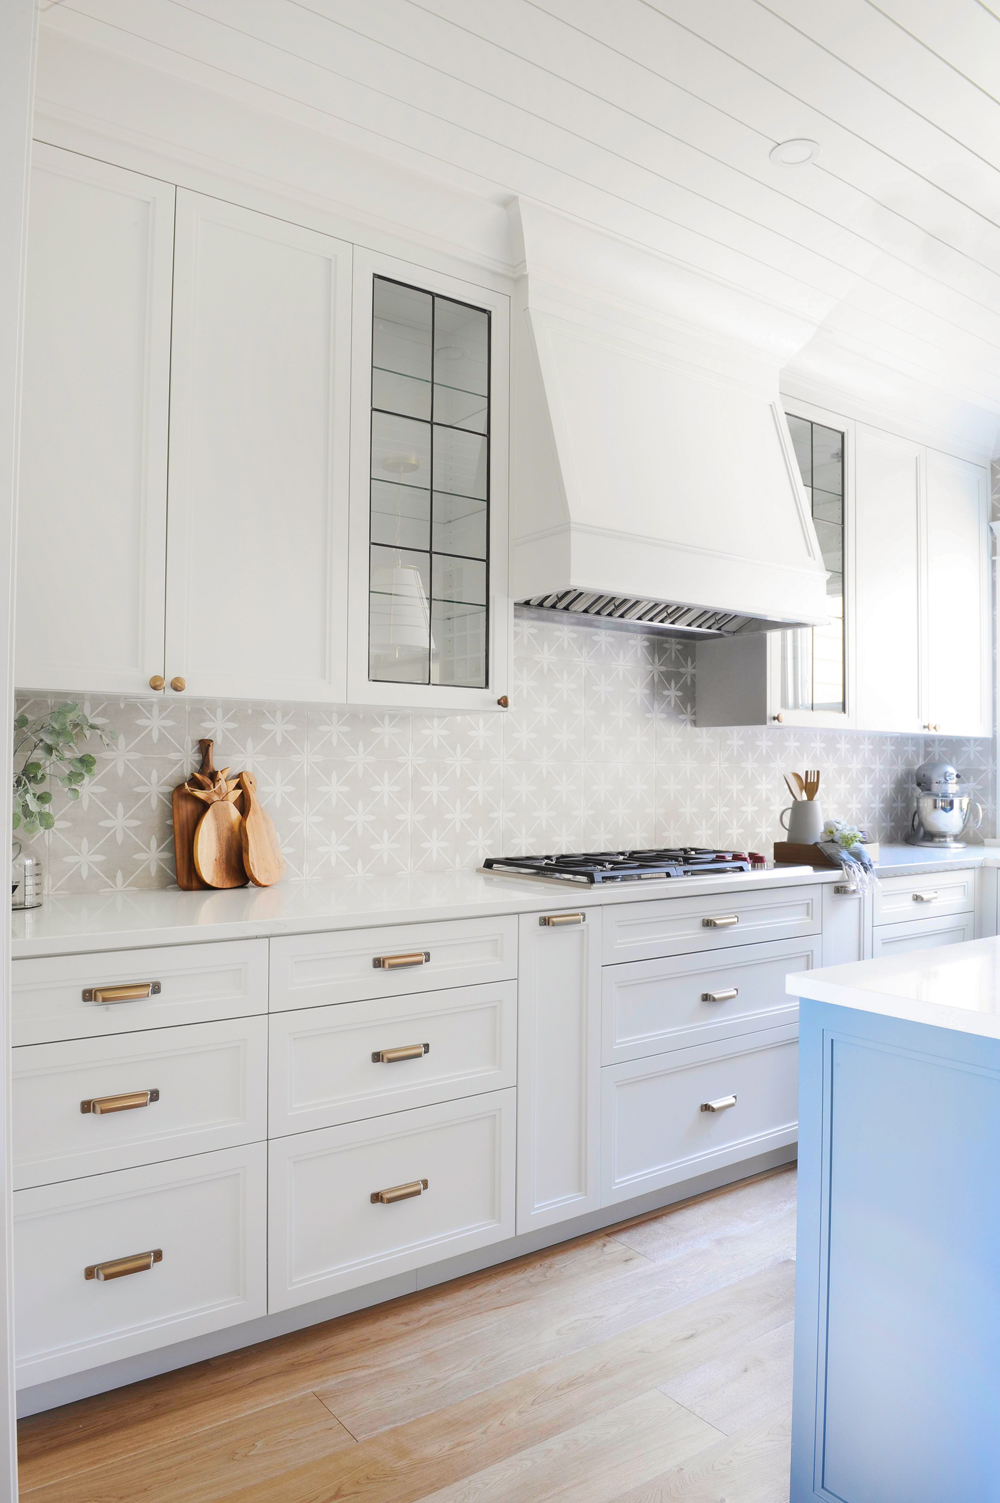 white kitchen with brass pulls and edge of blue island in right foreground